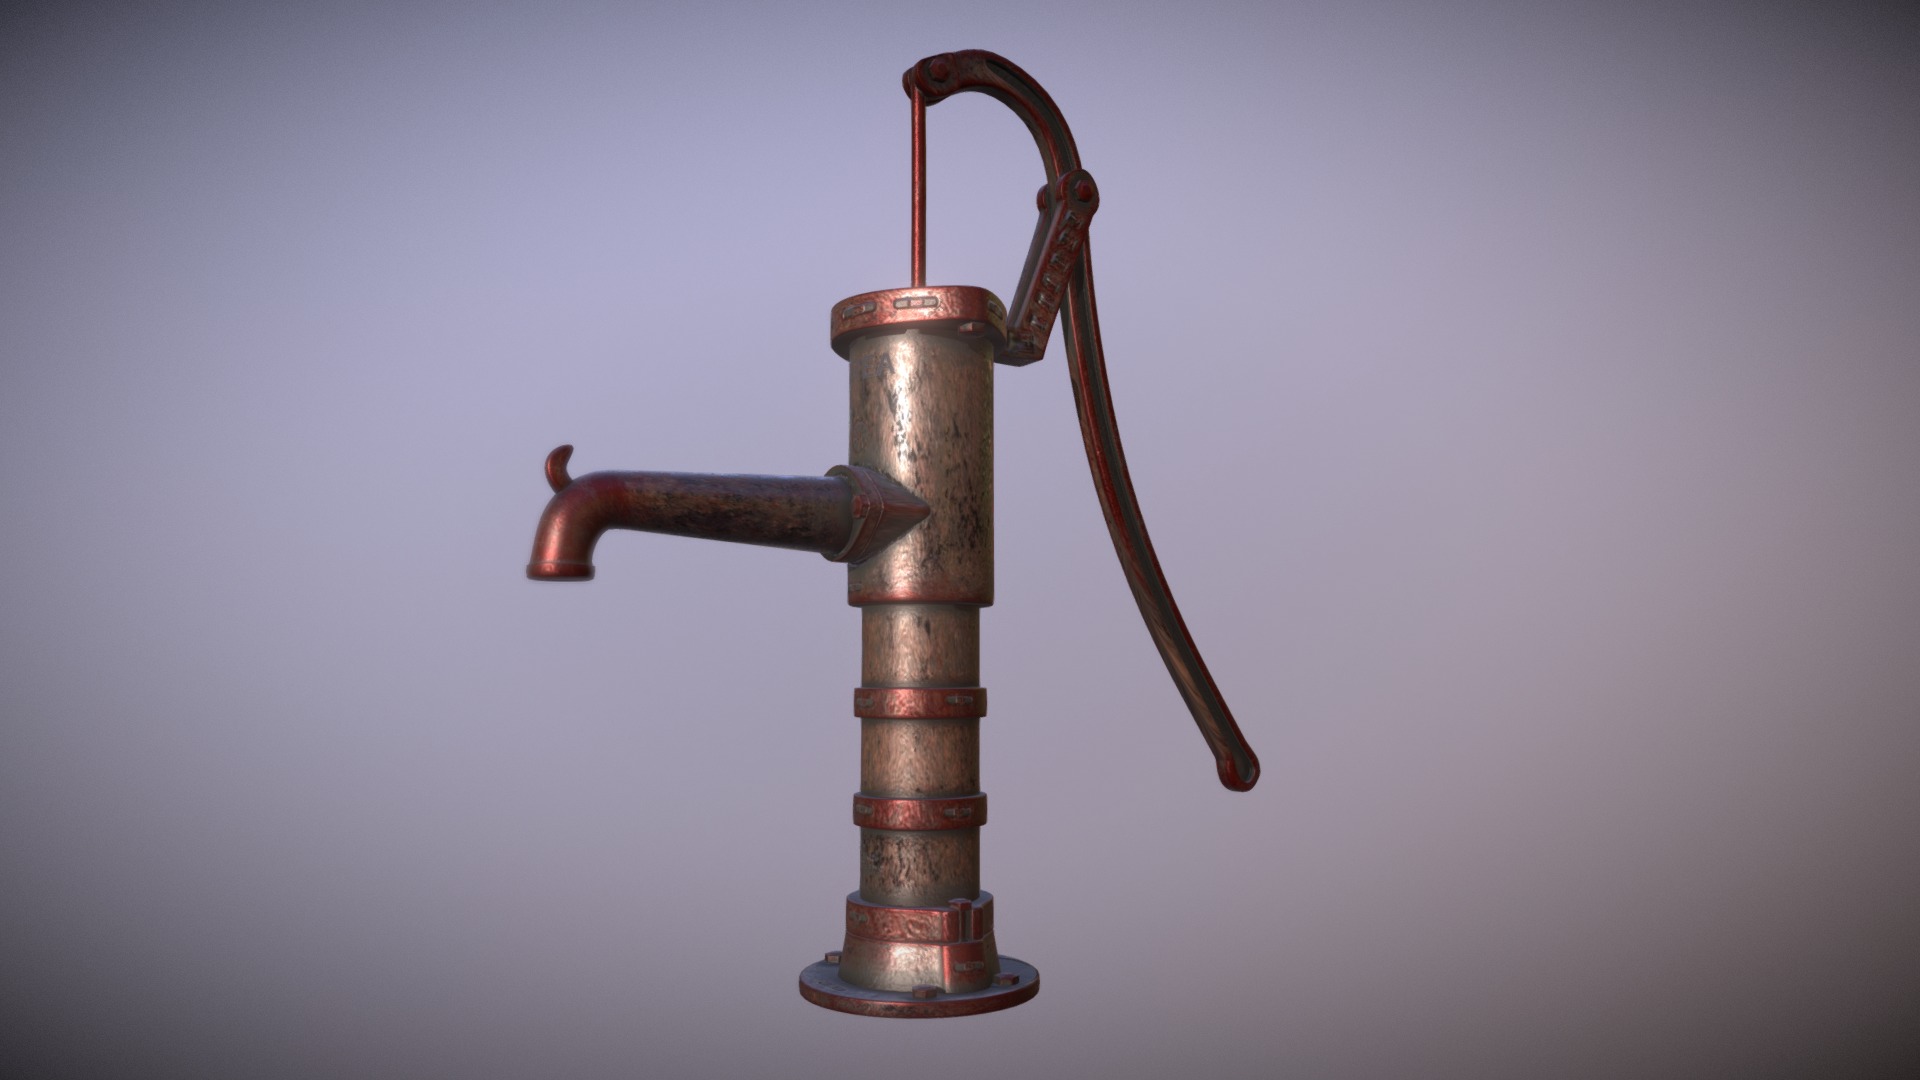 3D model Old Classic Retro - This is a 3D model of the Old Classic Retro. The 3D model is about a metal object with a handle.